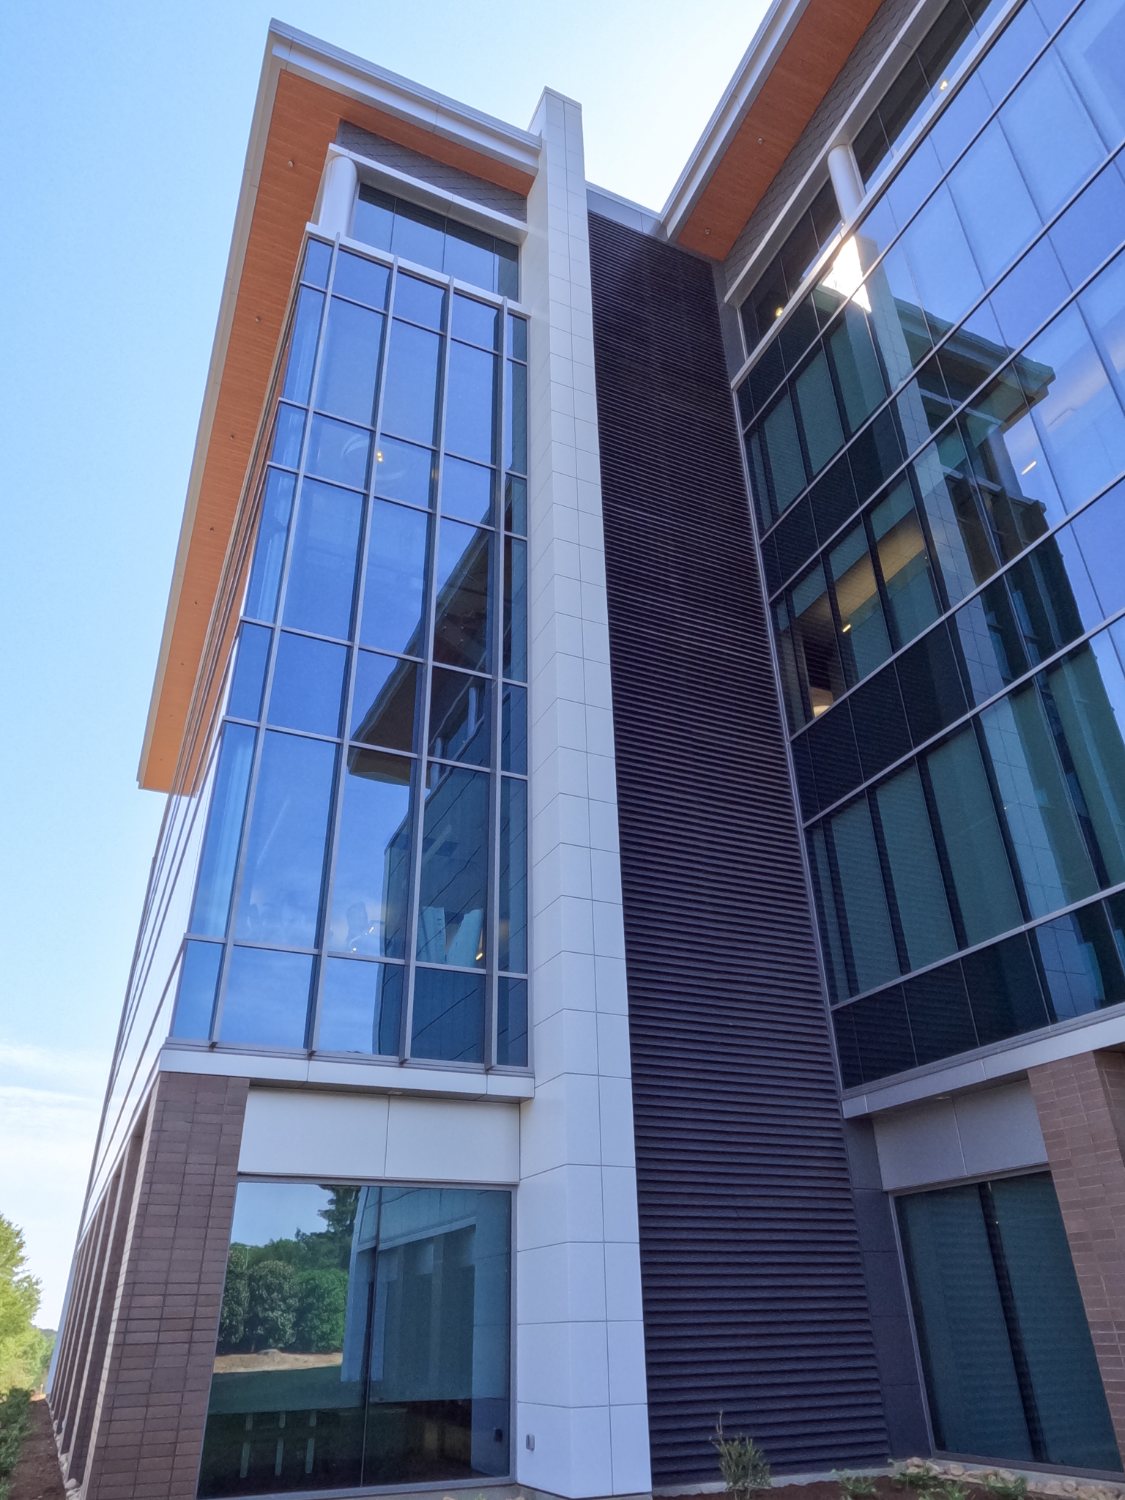 Image 33 of SFB 01 1 in A two-toned facade for Southern First Bank in South Carolina - Cosentino